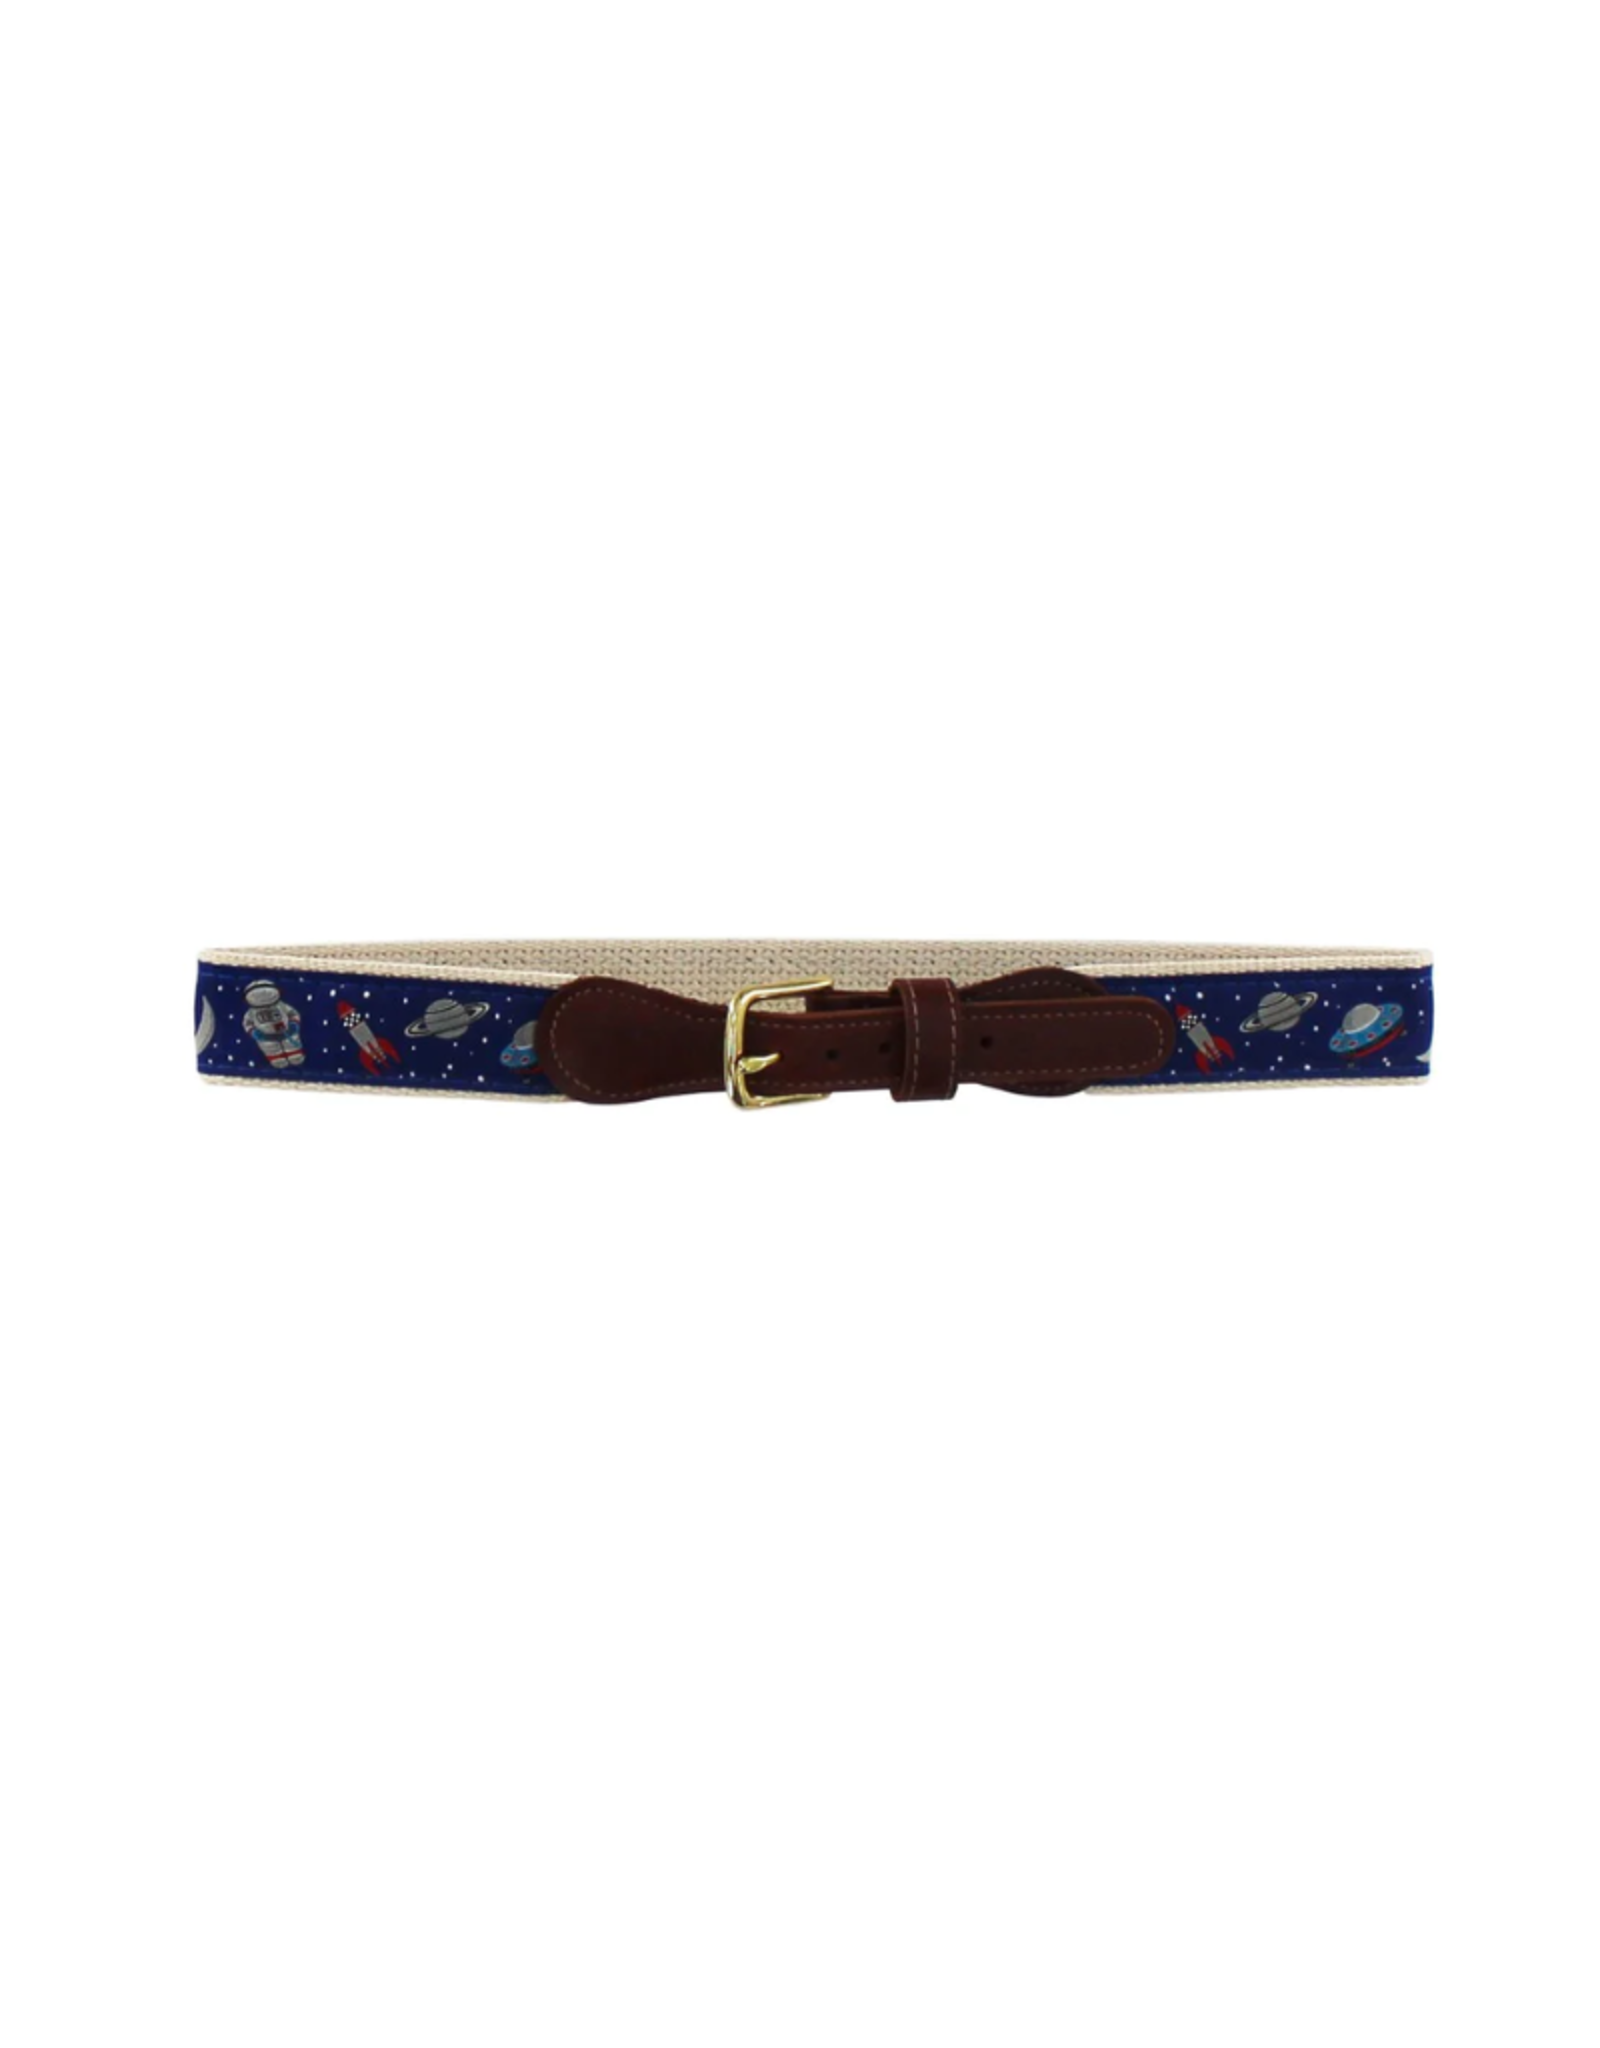 The Bailey Boys Buddy Belt - Outerspace